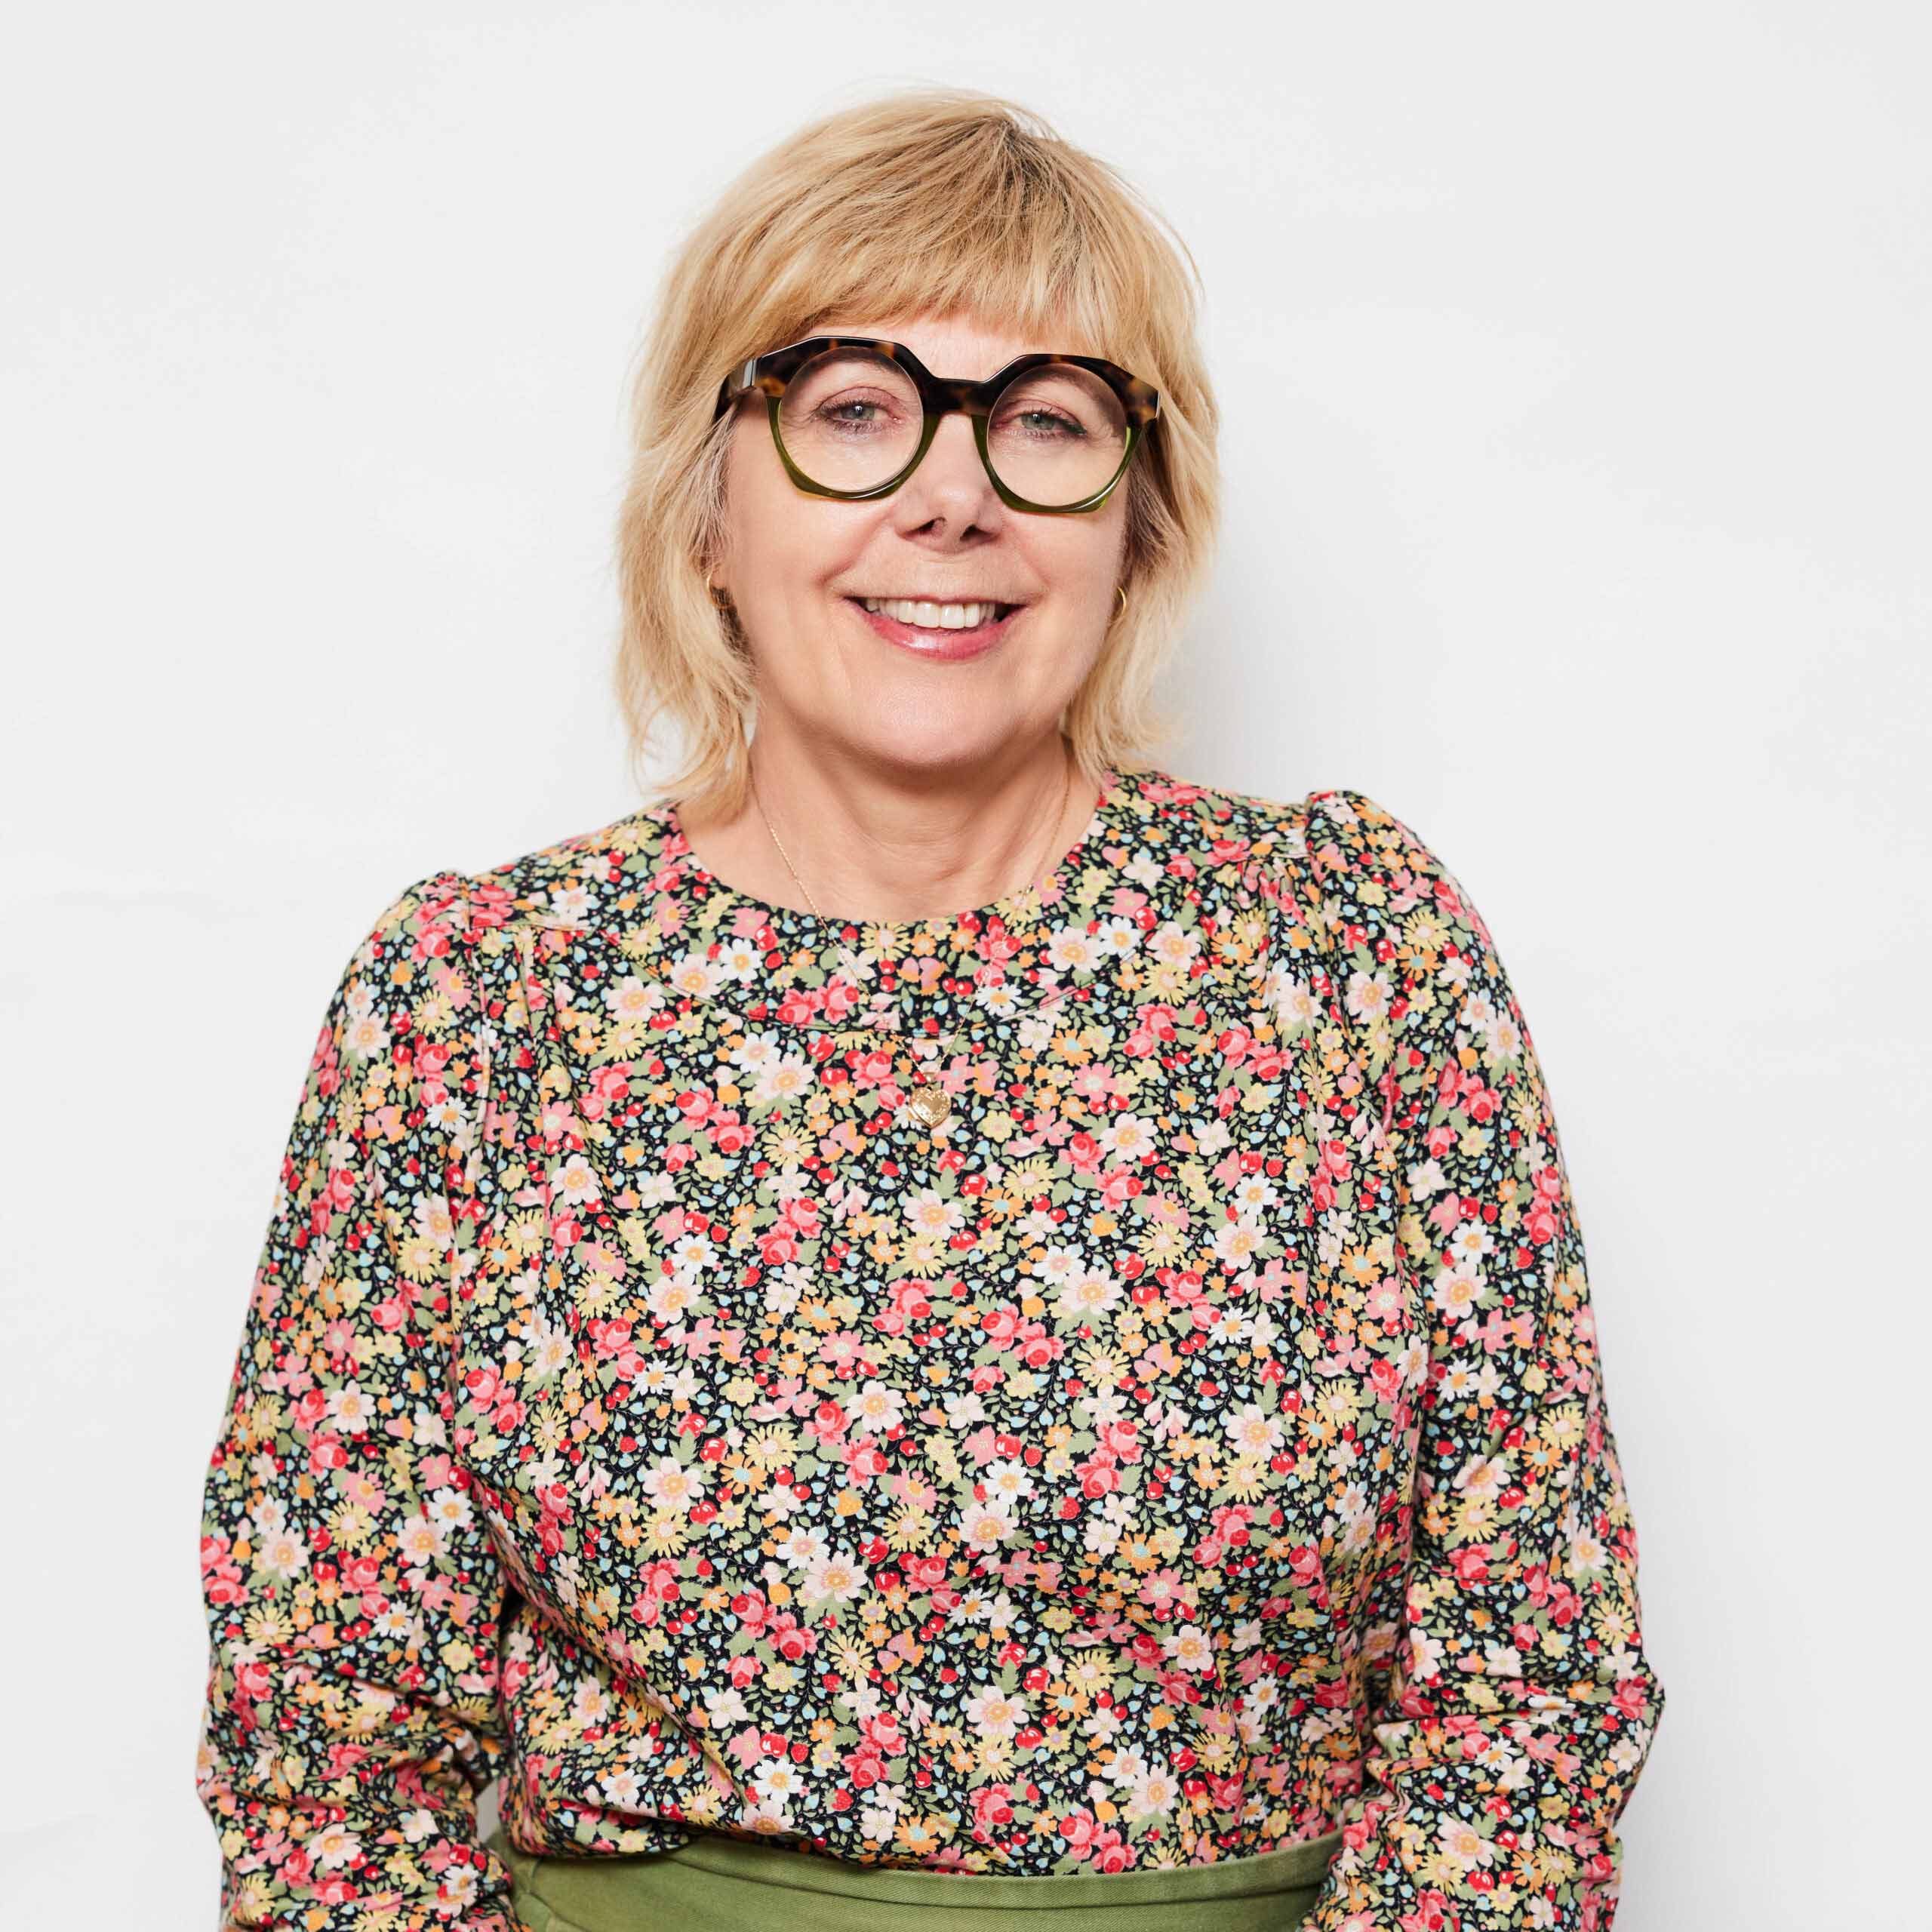 Penny, a woman with short hair and glasses. She is wearing a floral top. She is smiling.